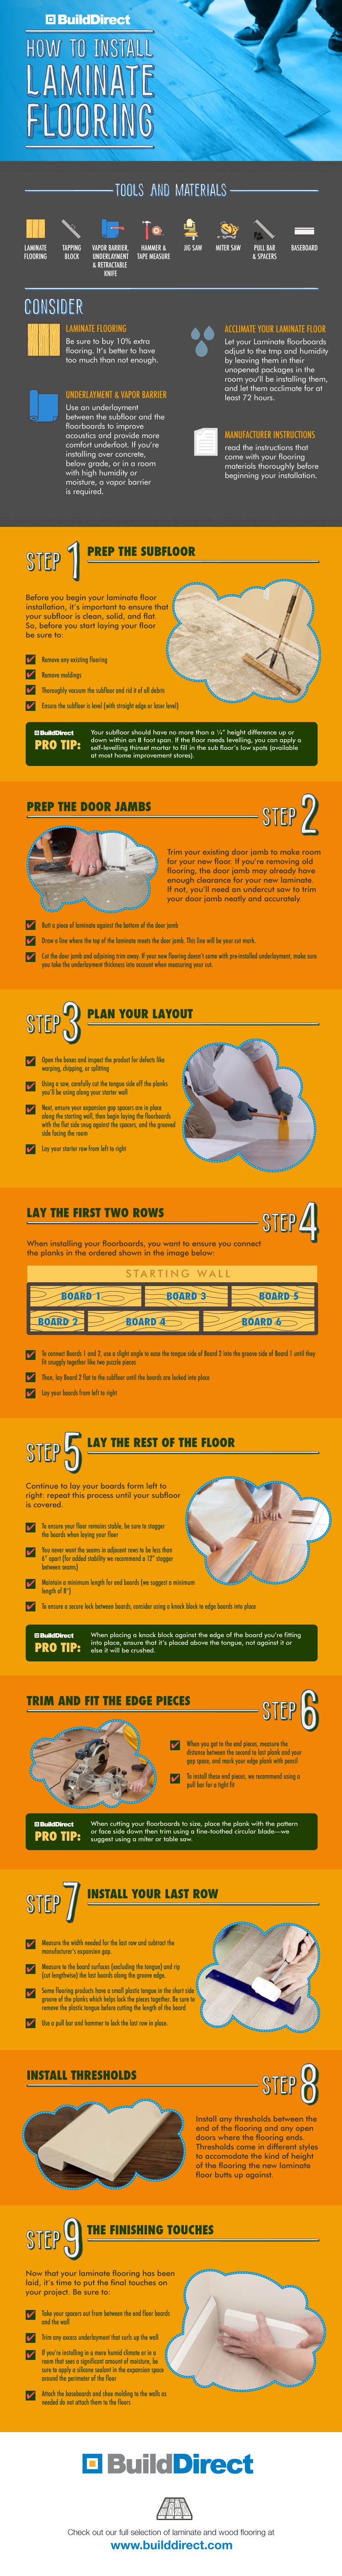 How to Install Laminate Floor